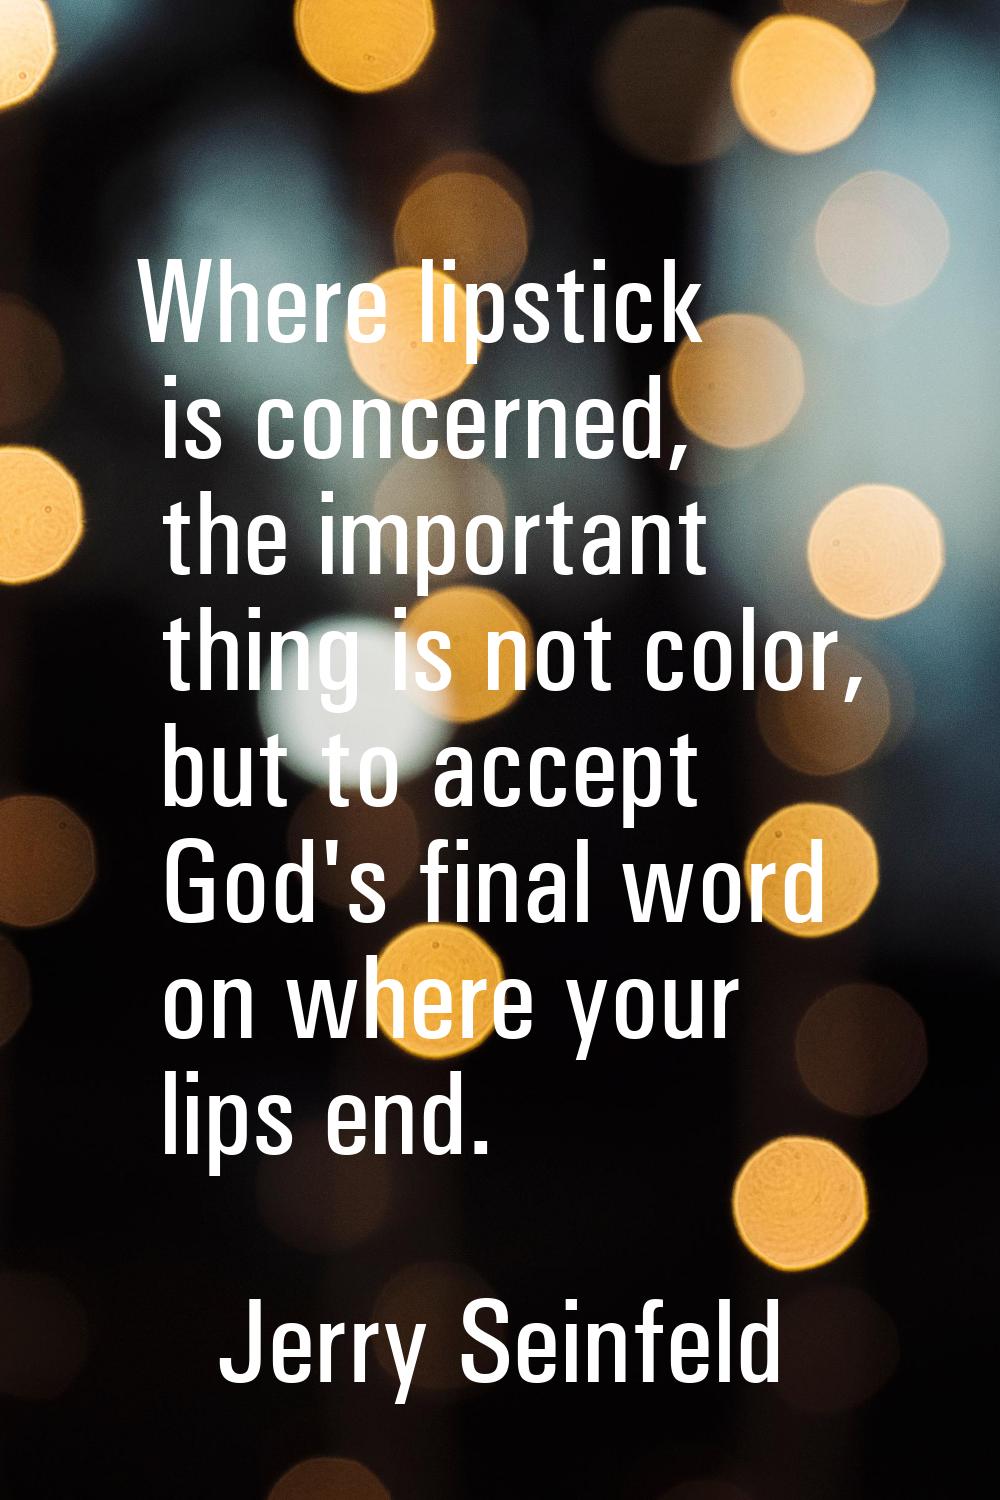 Where lipstick is concerned, the important thing is not color, but to accept God's final word on wh